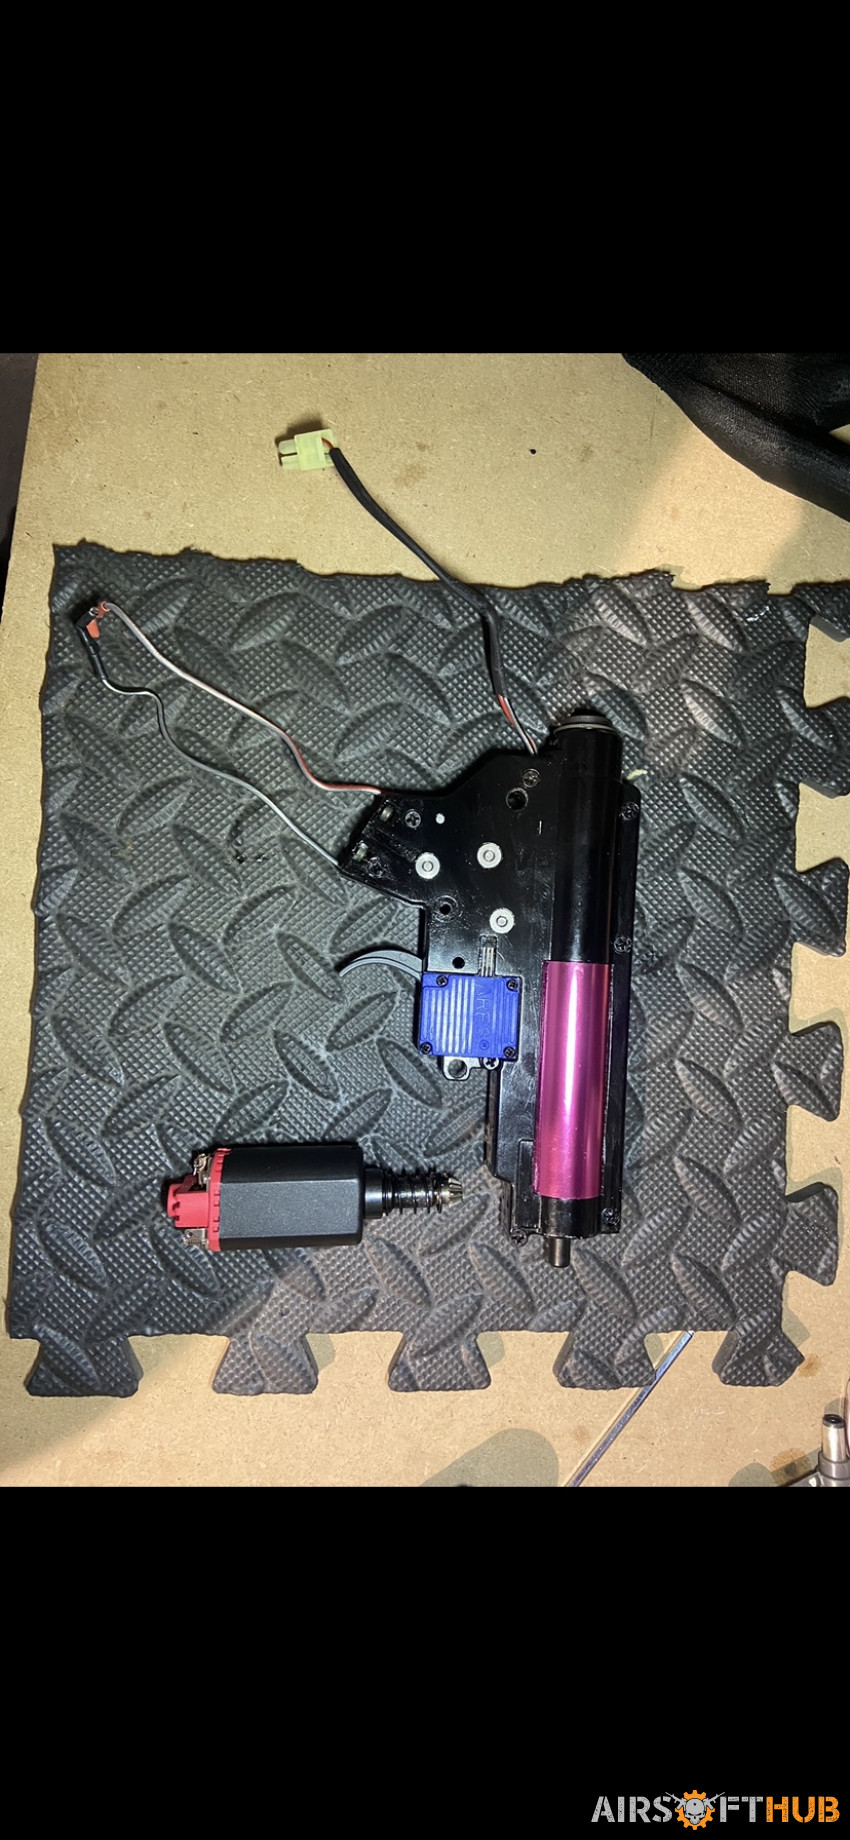 ARES AMOEBA GEARBOX AND MOTOR - Used airsoft equipment